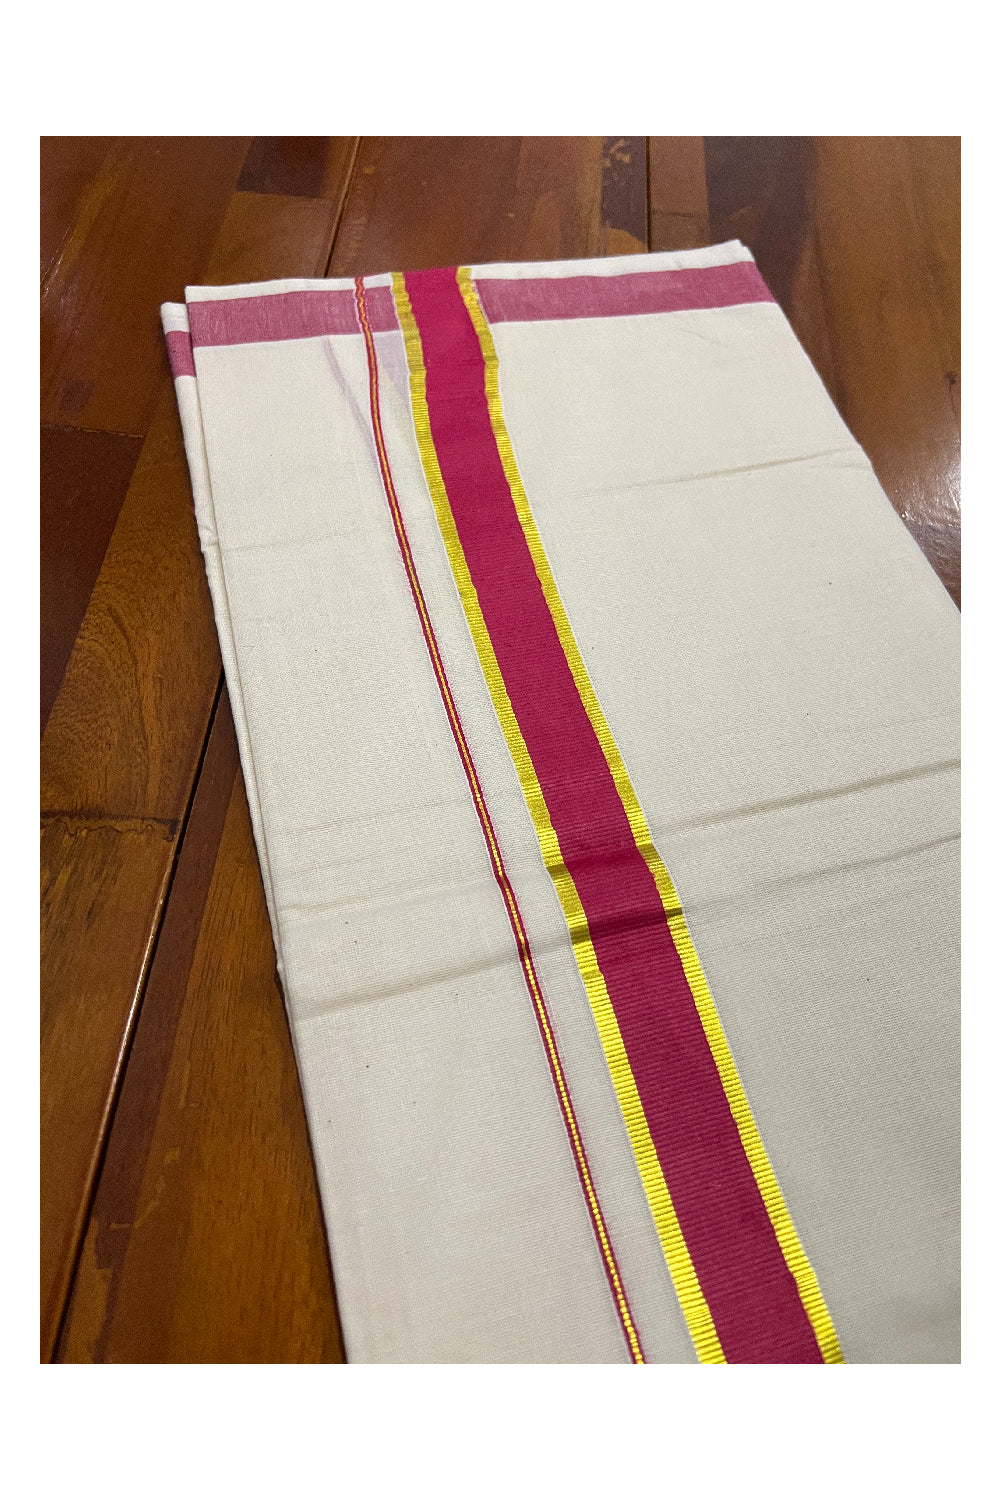 Off White Pure Cotton Double Mundu with Kasavu and Red Kara (South Indian Dhoti)